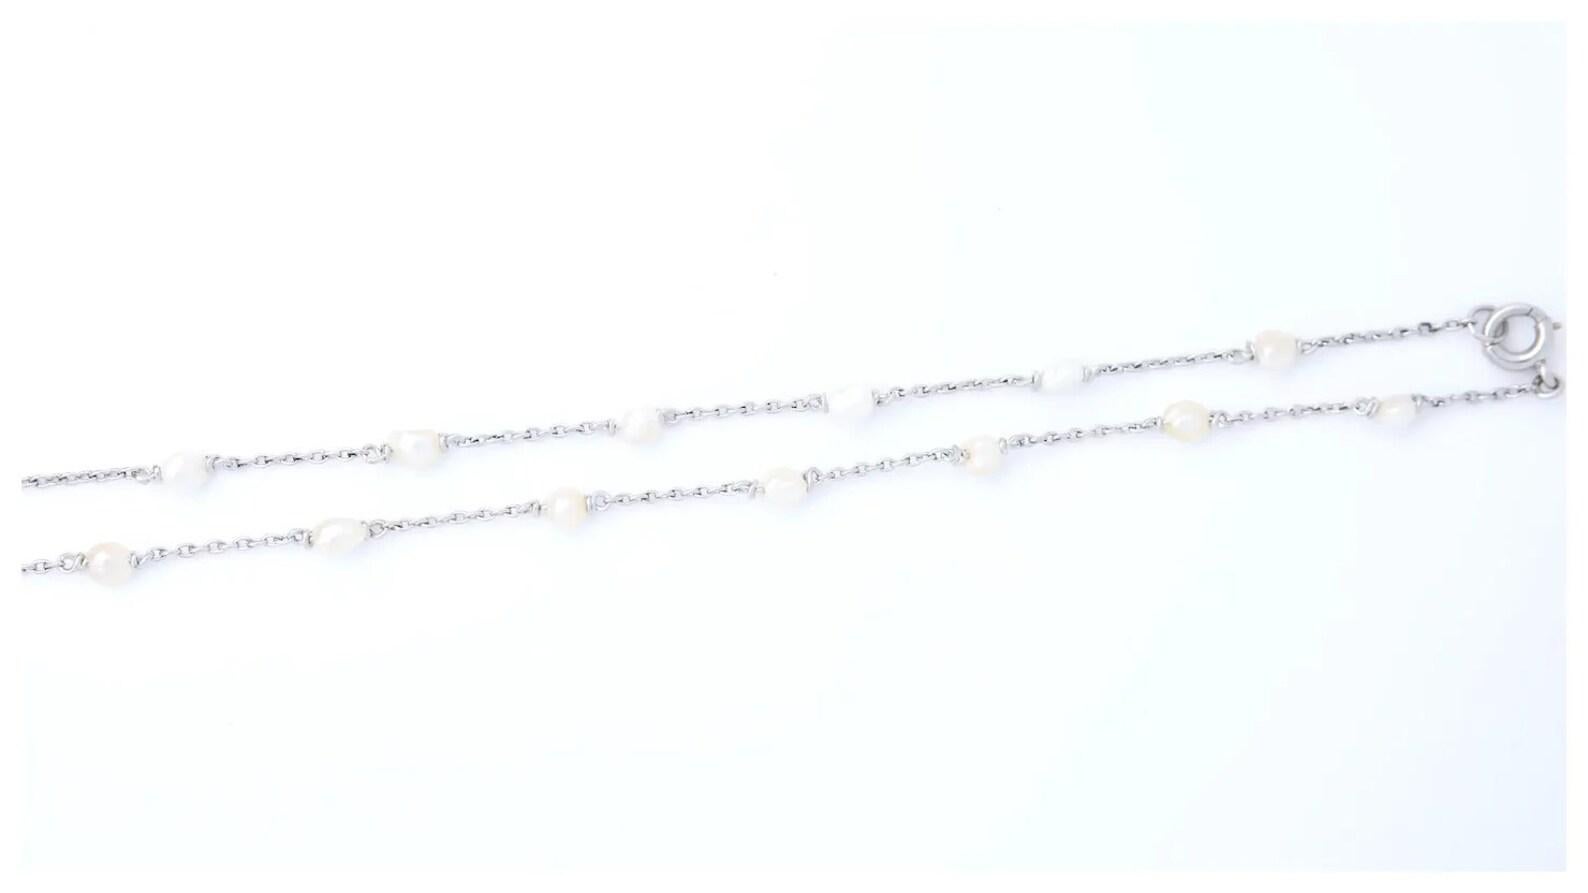 A handmade Edwardian period natural saltwater pearl necklace on a handmade platinum chain. Featuring 19 natural saltwater pearls measuring approximately 4mm in diameter. The pearls feature a beautiful bright lustrous nacre and are on a handmade